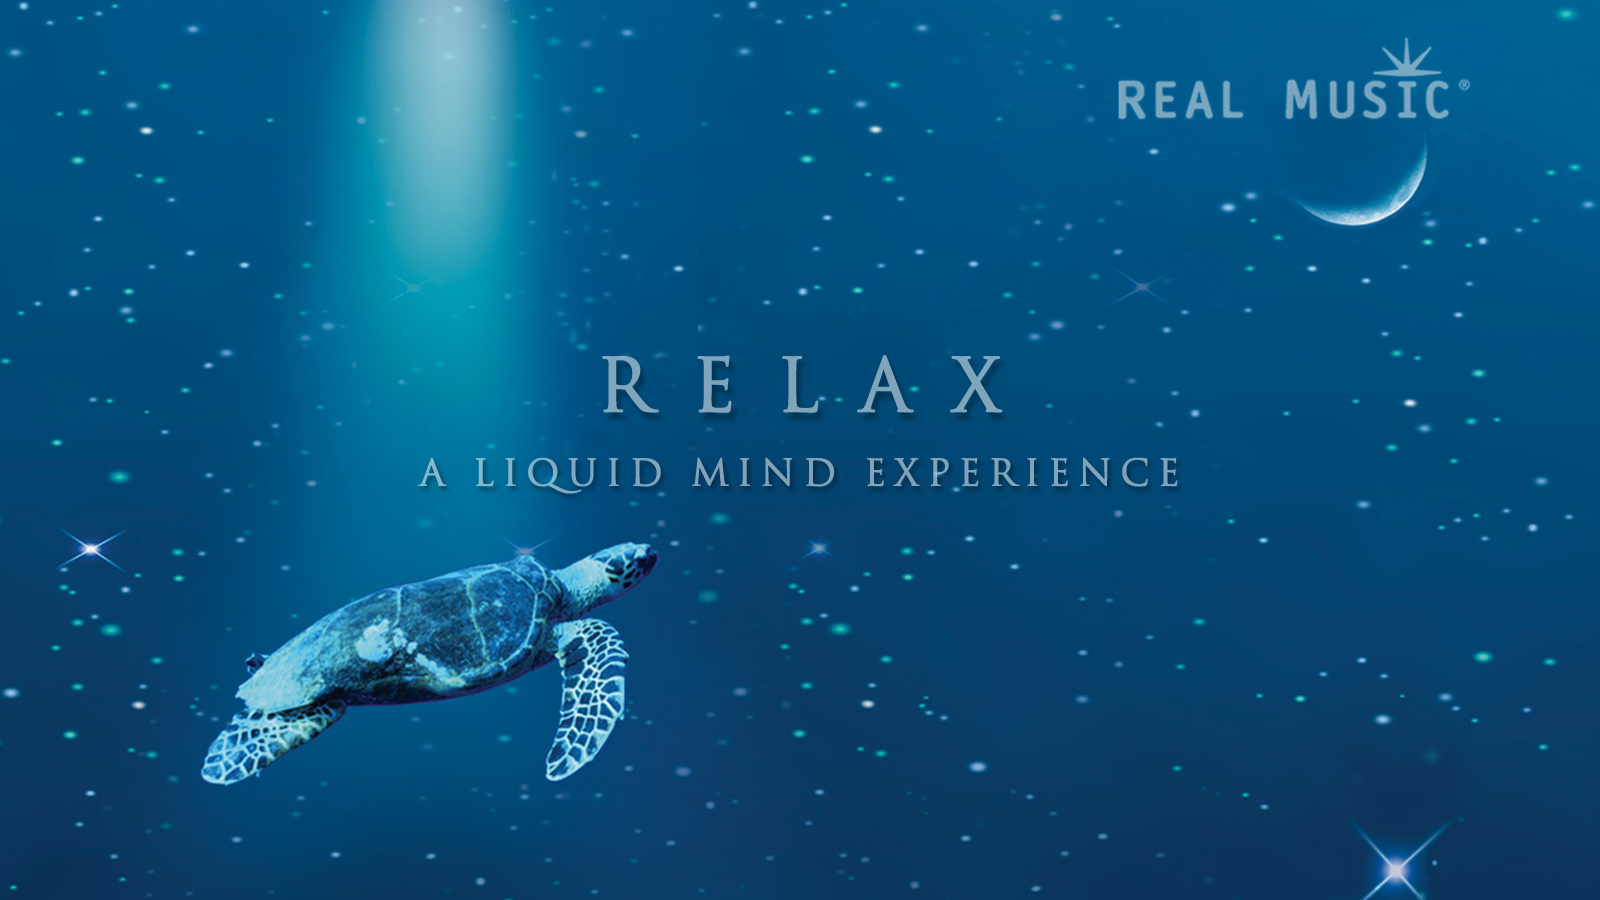 Here Are Real Music And Liquid Mind Wallpaper For Puter